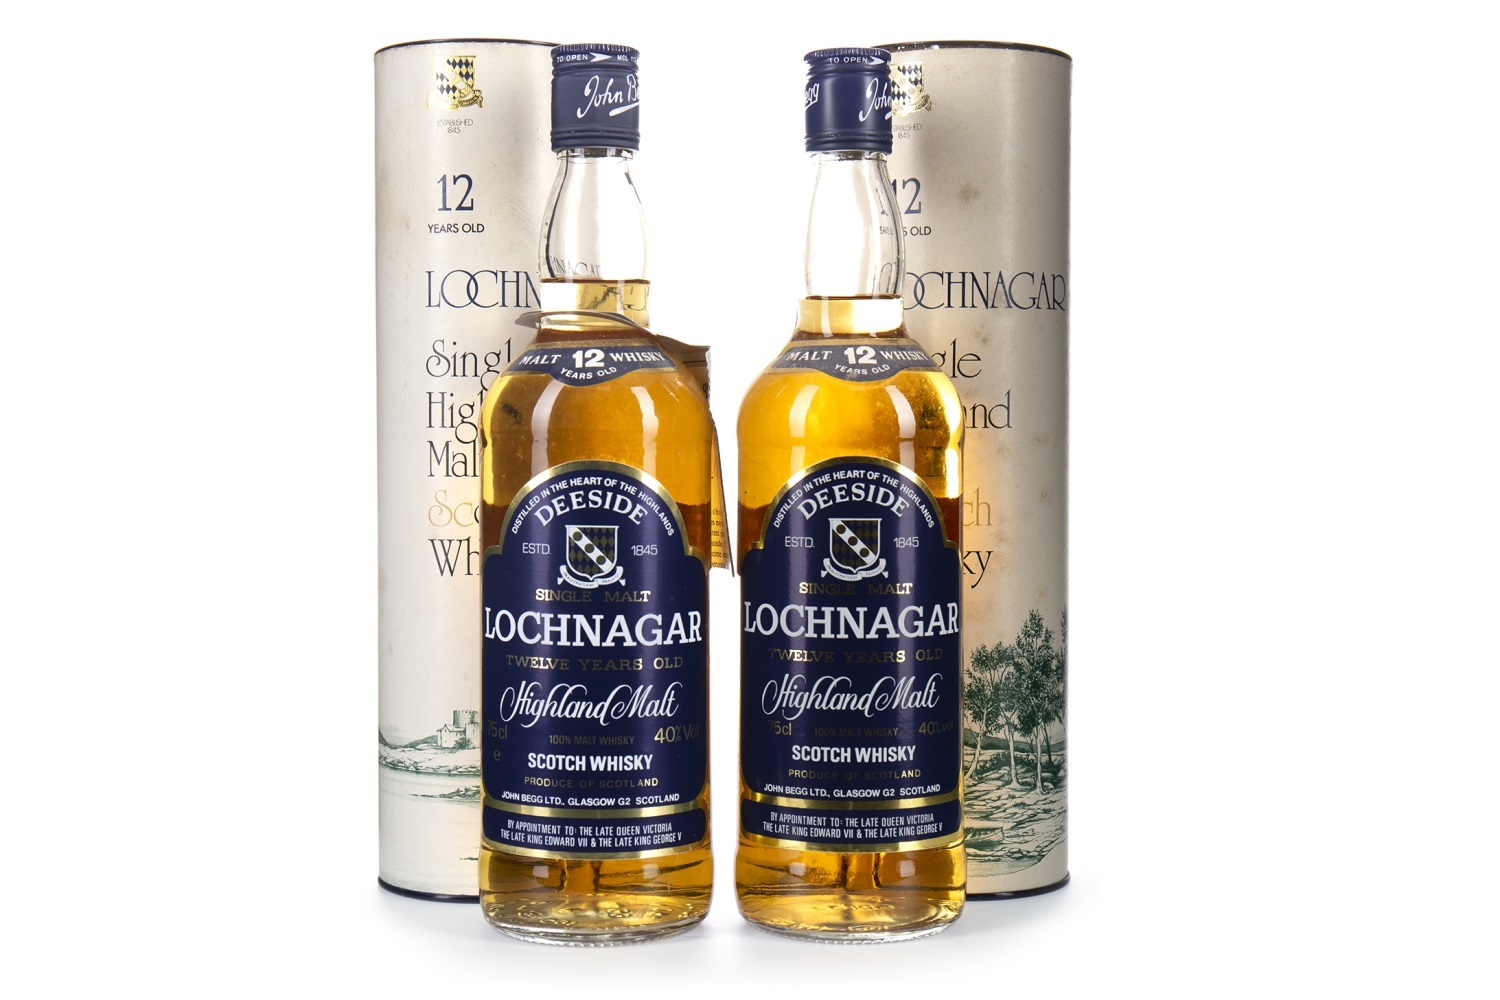 TWO BOTTLES OF ROYAL LOCHNAGAR 12 YEARS OLD